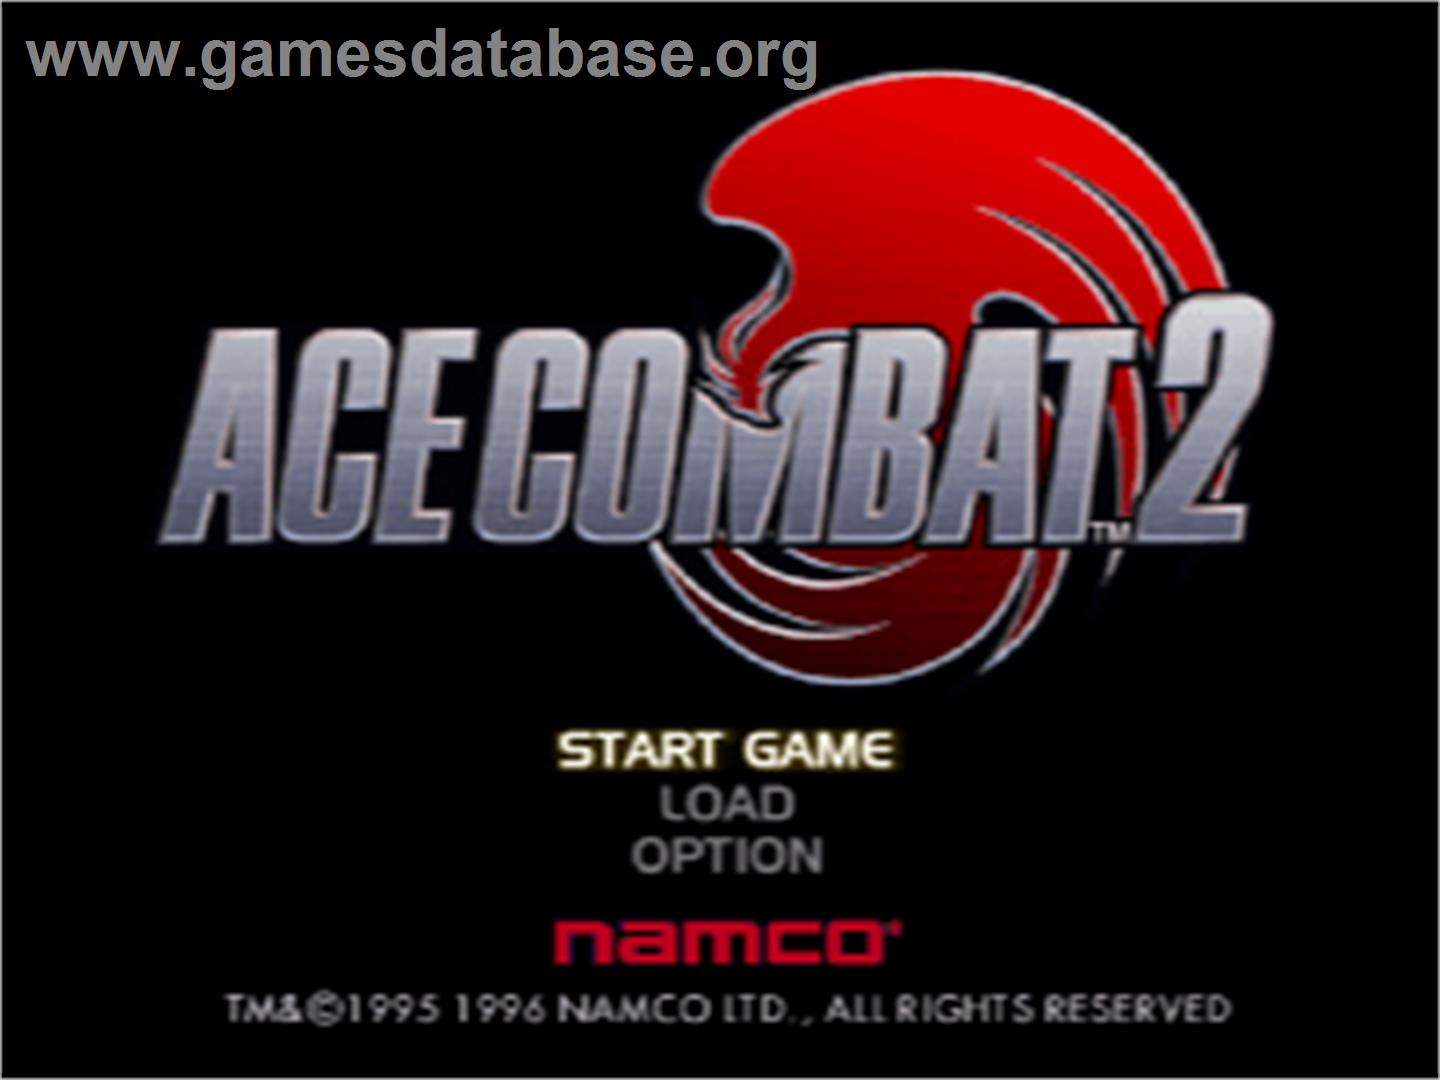 Ace Combat 2 - Sony Playstation - Artwork - Title Screen